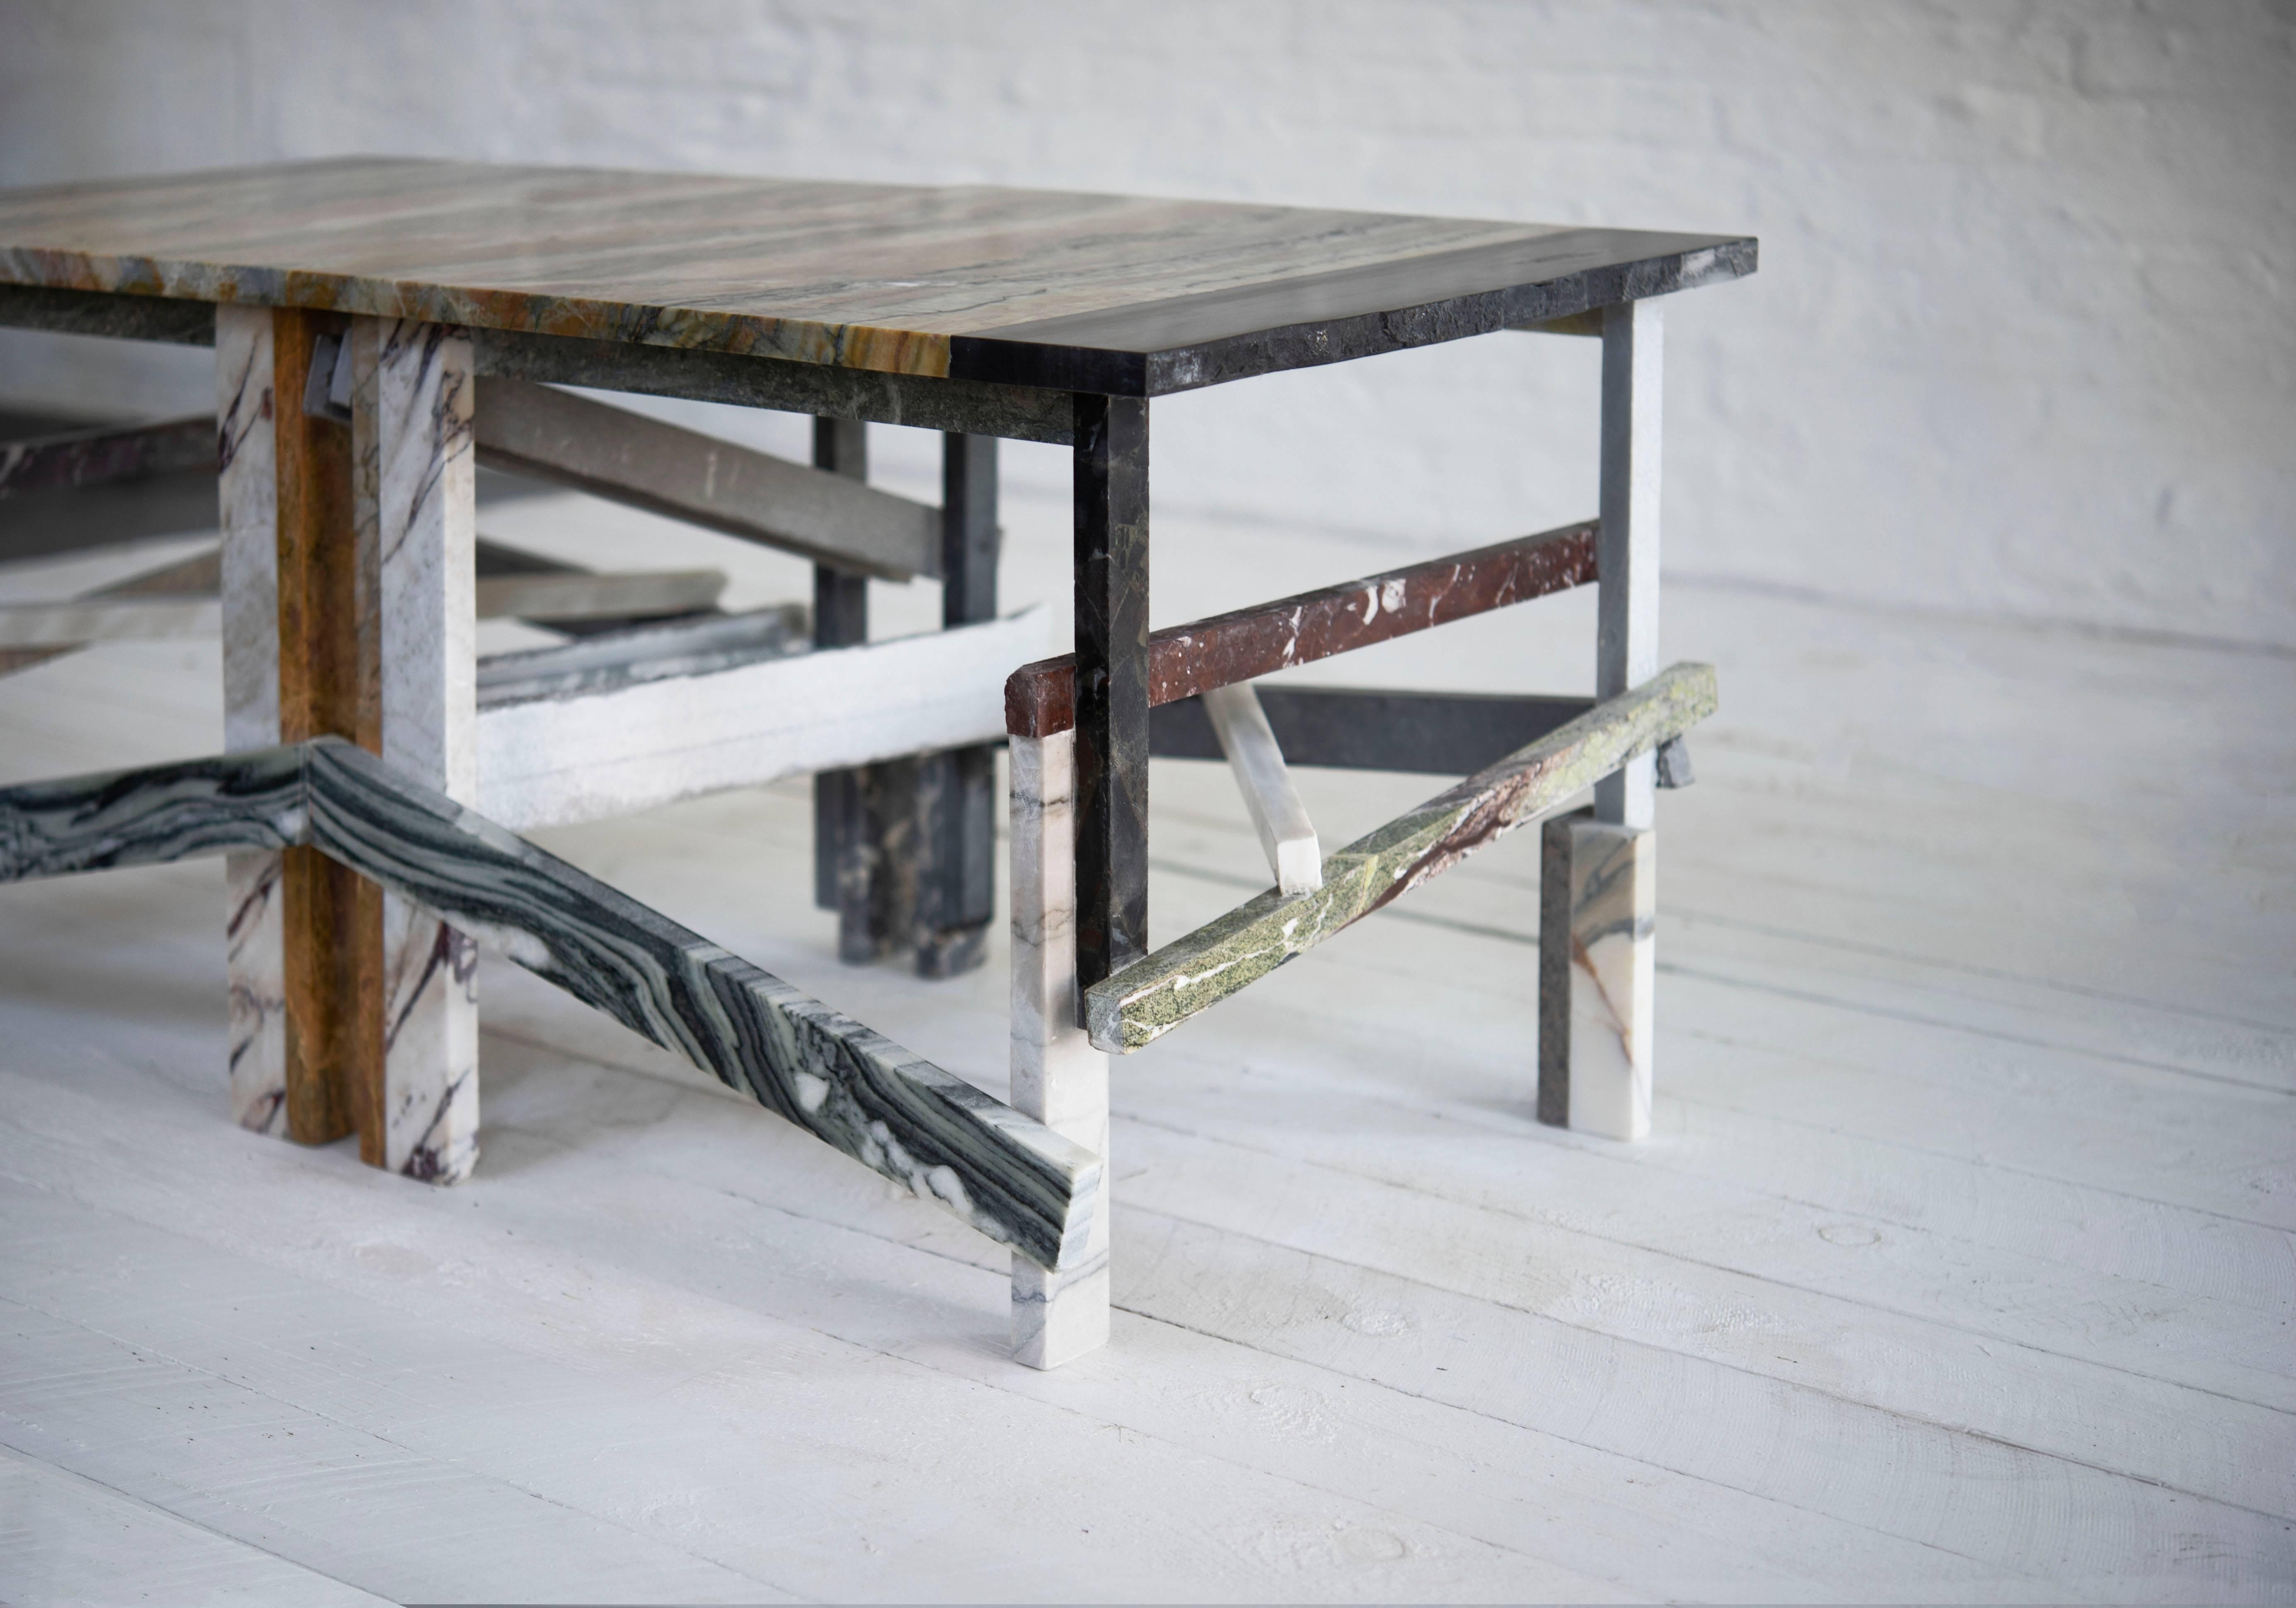 Belgian Contemporary Marble Tables  'Twin Tables' by Atelier Lachaert Dhanis, 2018 For Sale